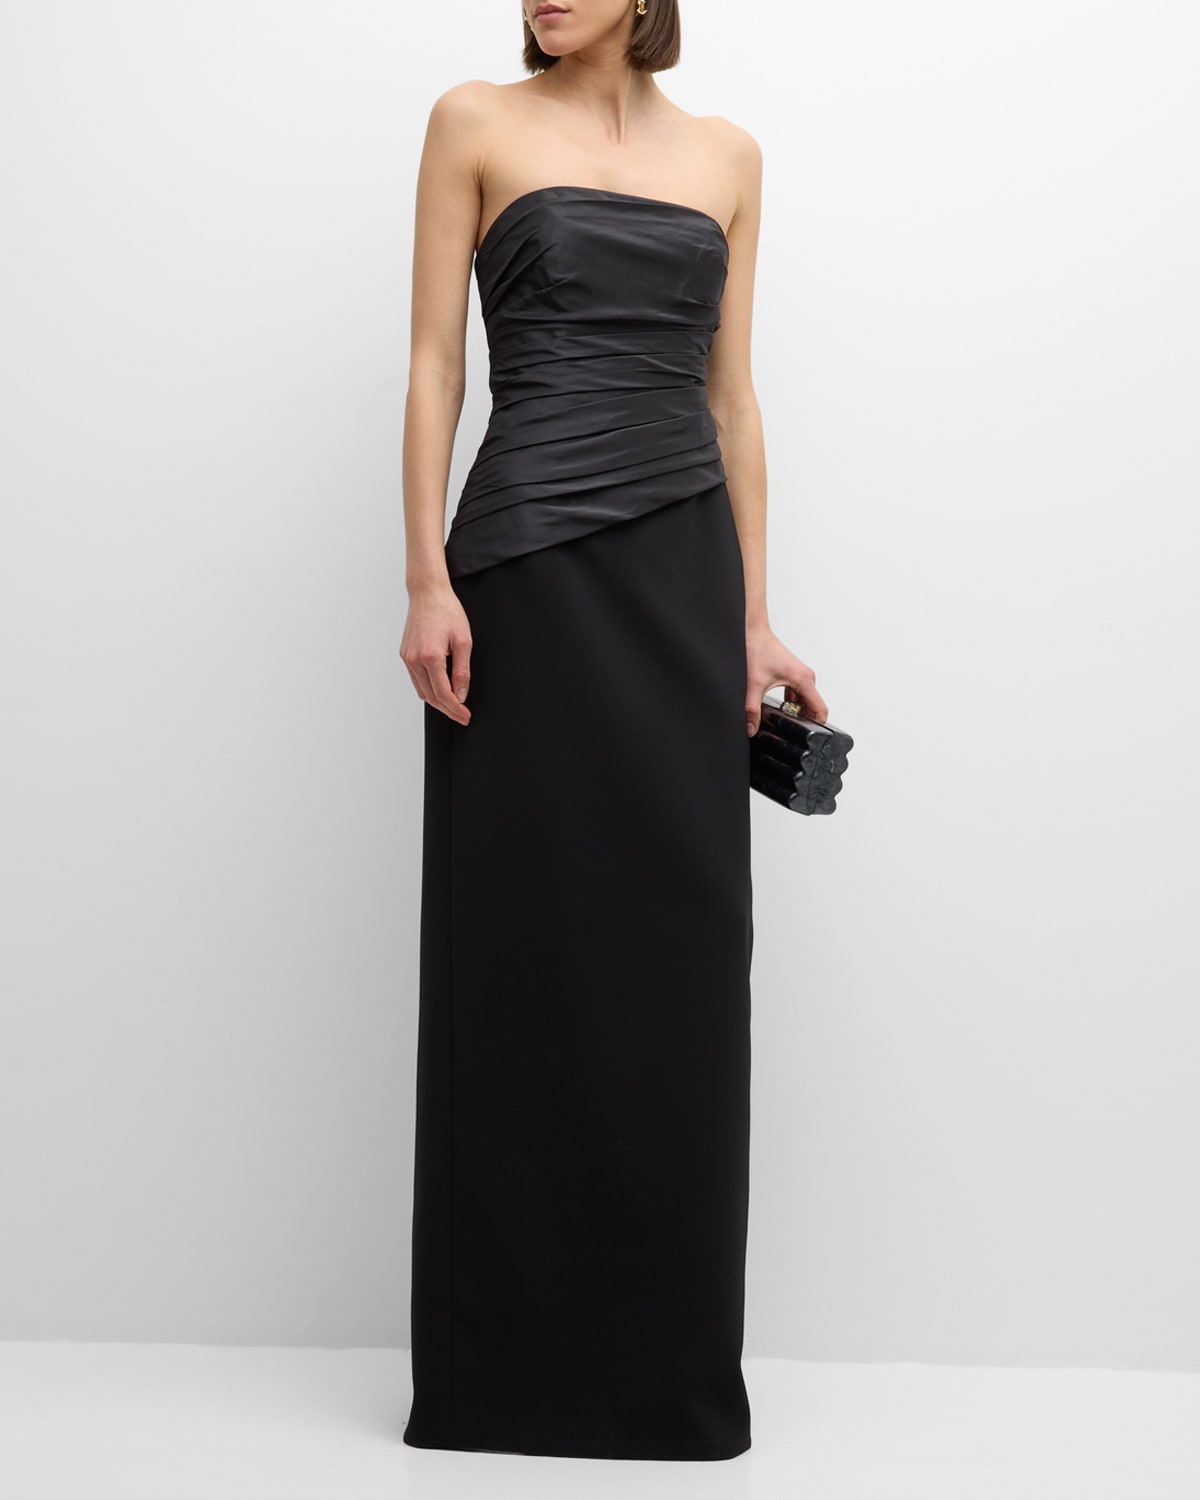 Strapless Ruched Bodice Gown with Corset Boning